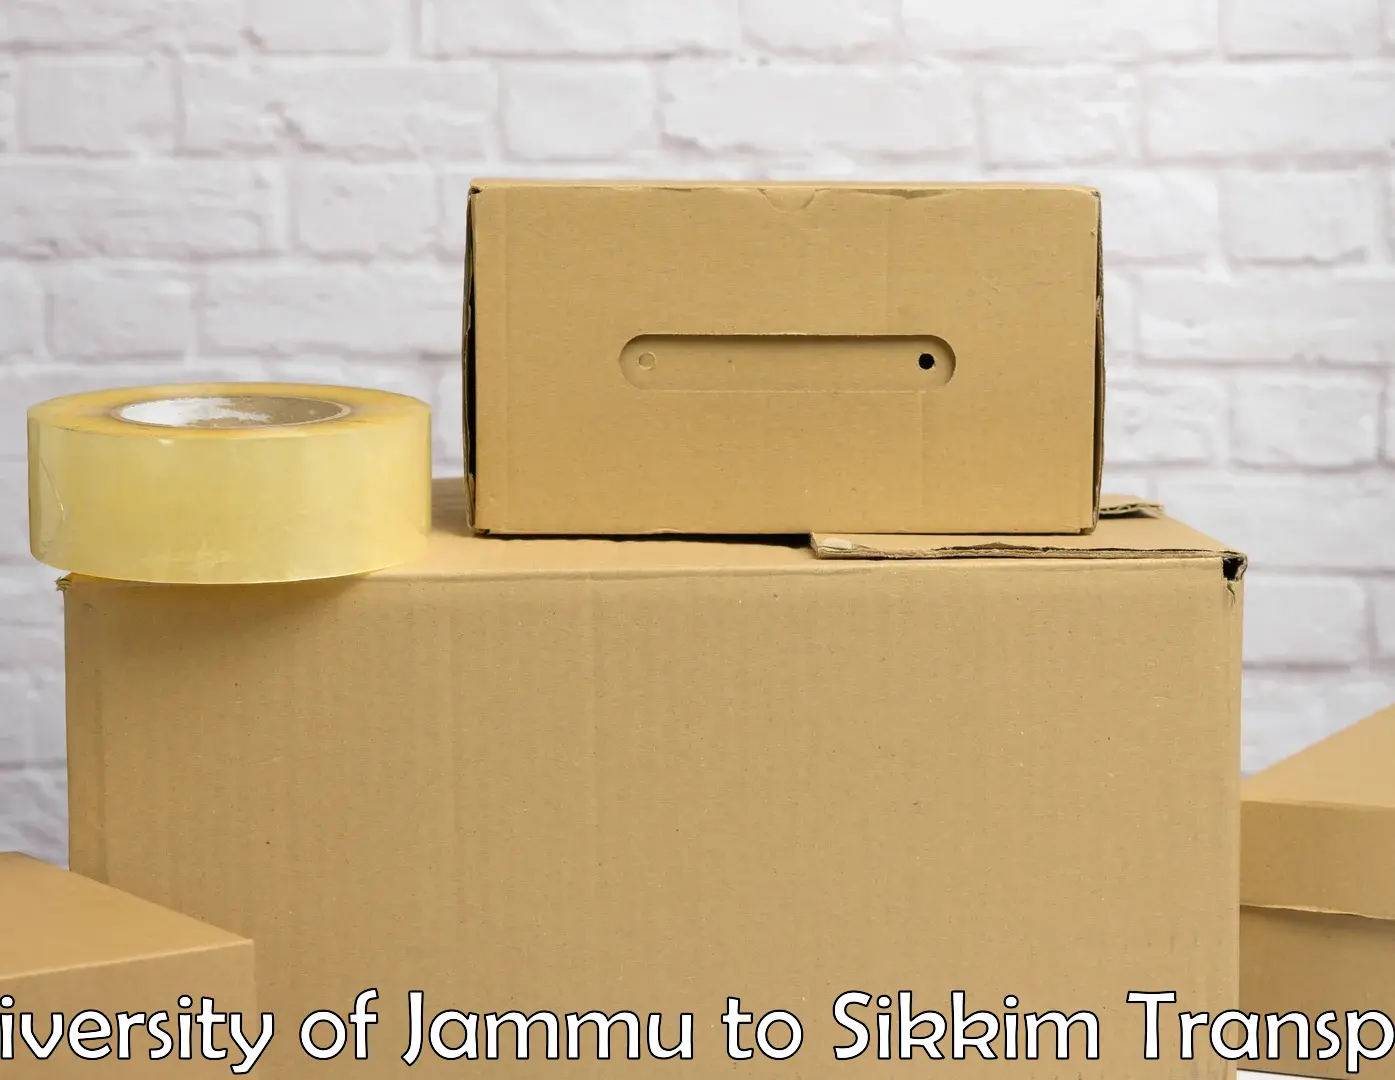 Best transport services in India University of Jammu to Sikkim